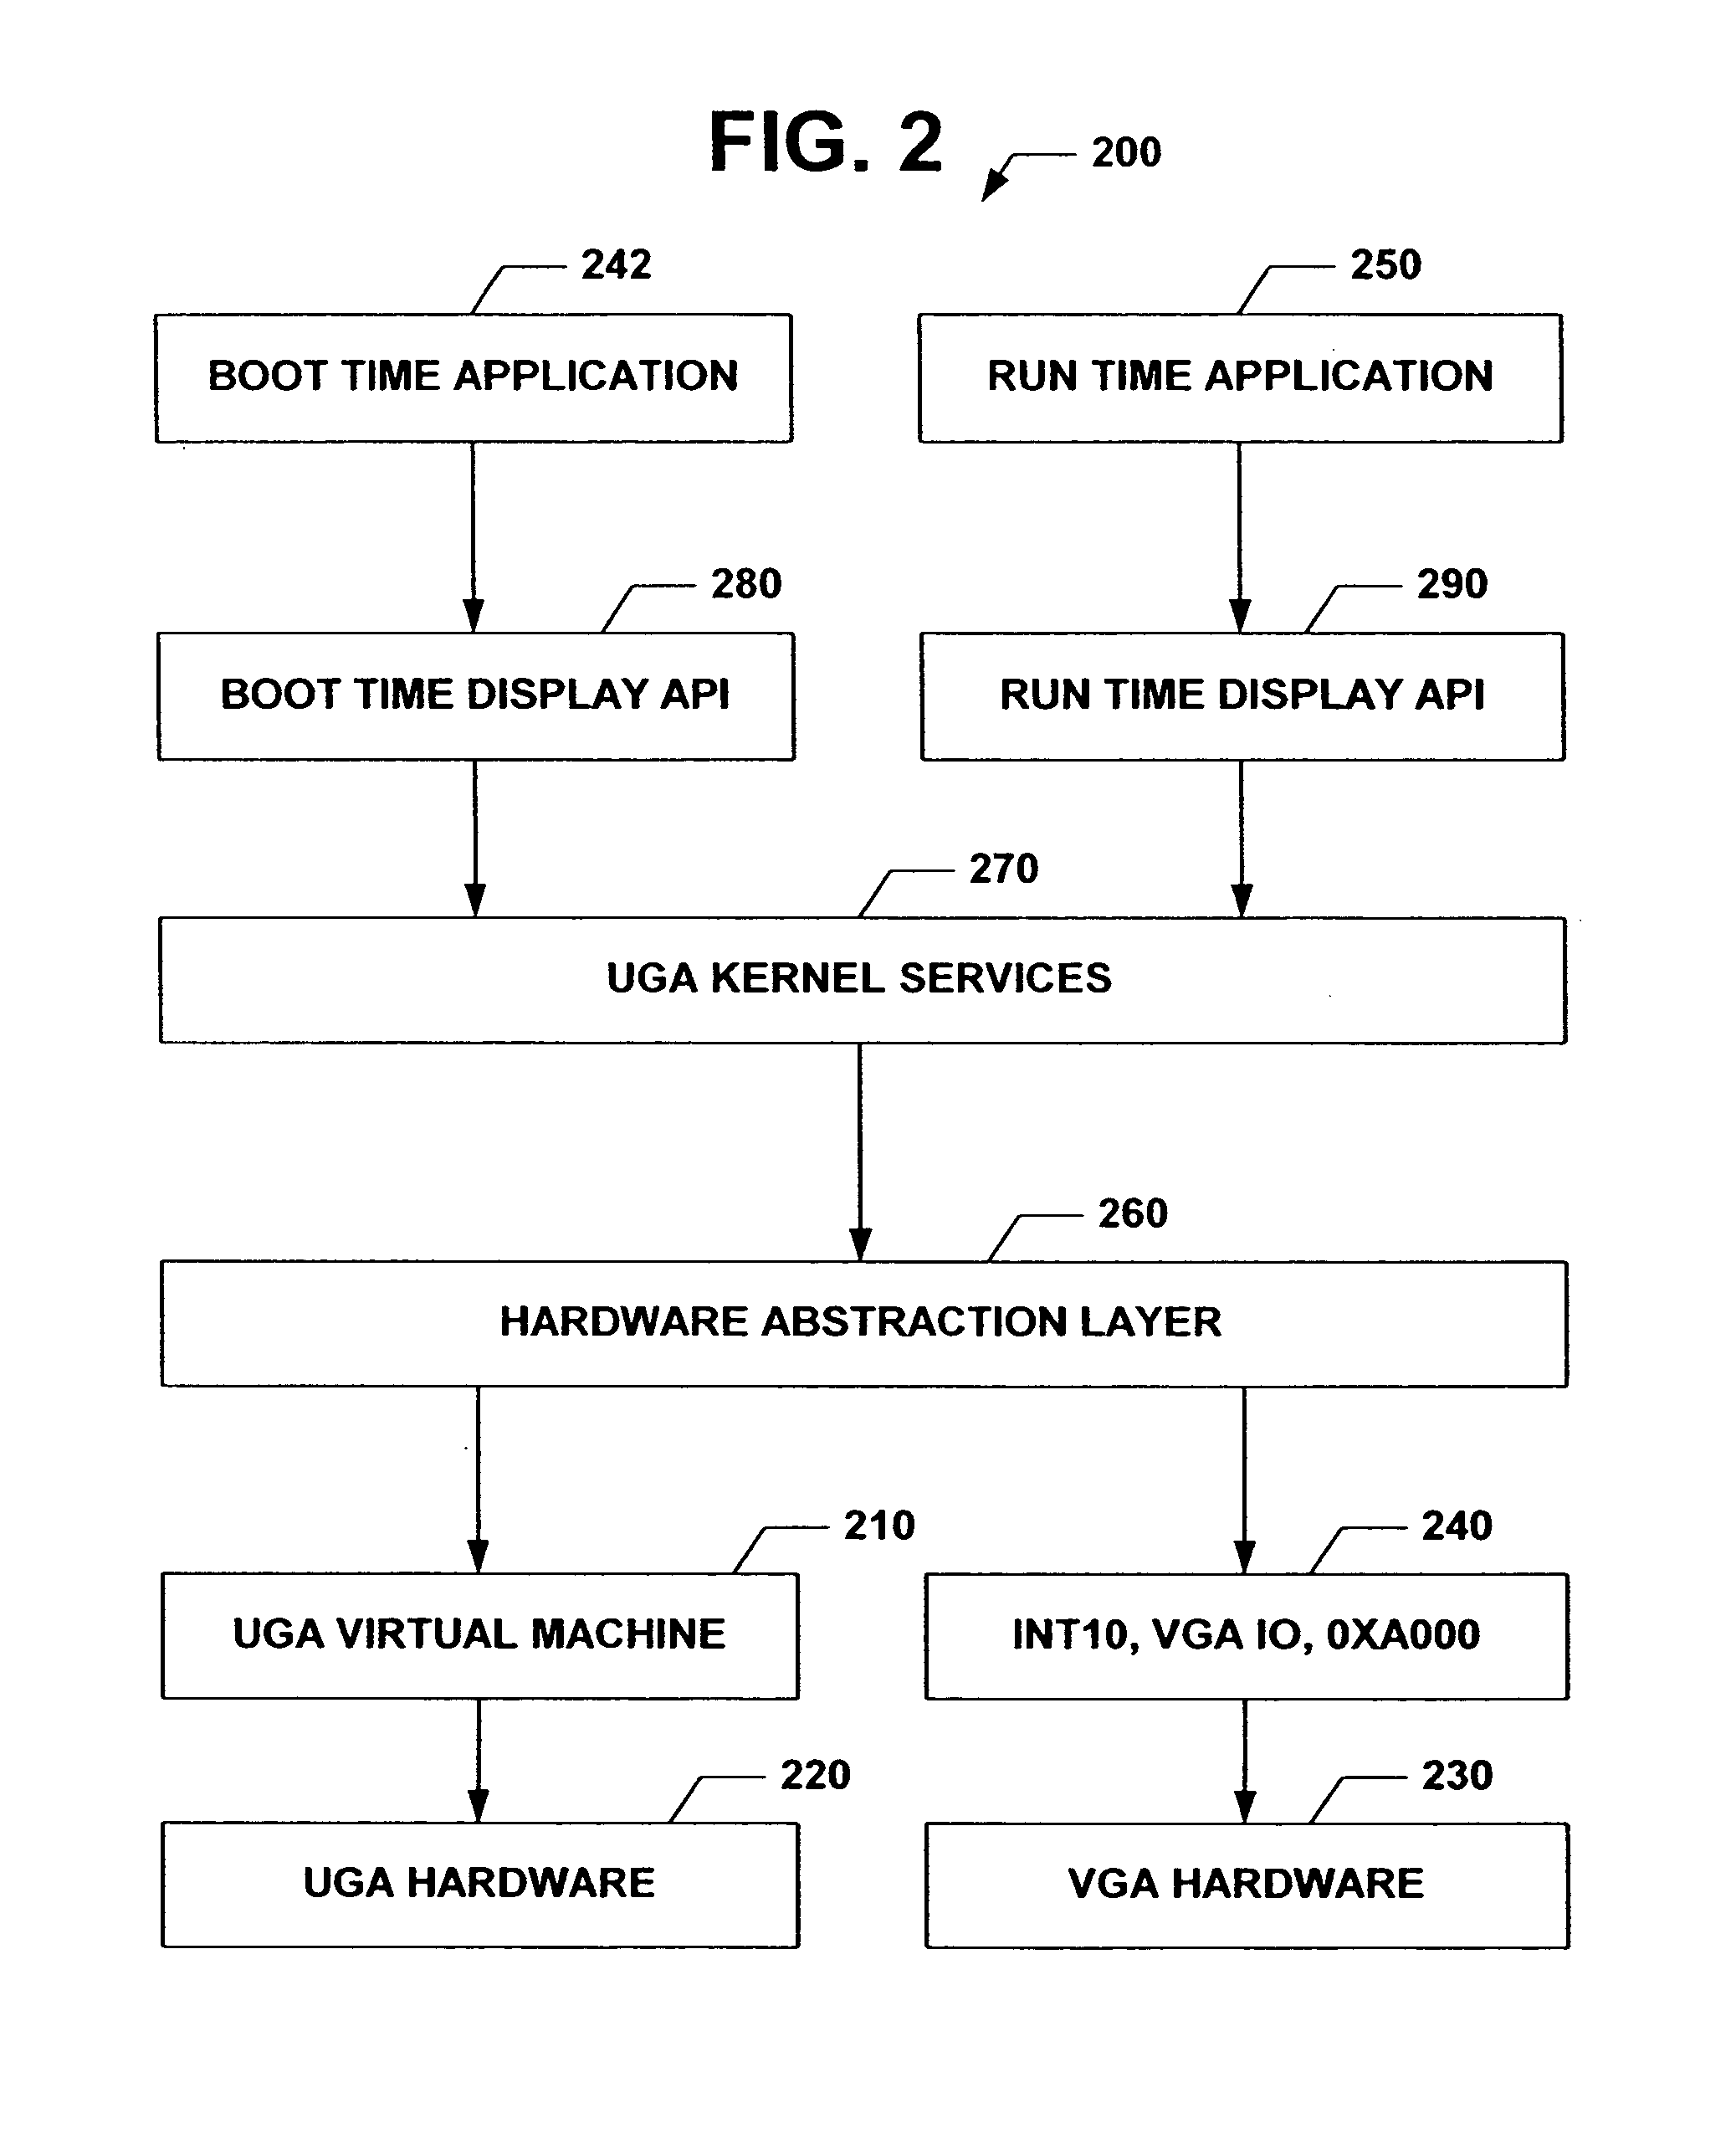 Universal graphic adapter for interfacing with hardware and means for determining previous output ranges of other devices and current device intial ranges